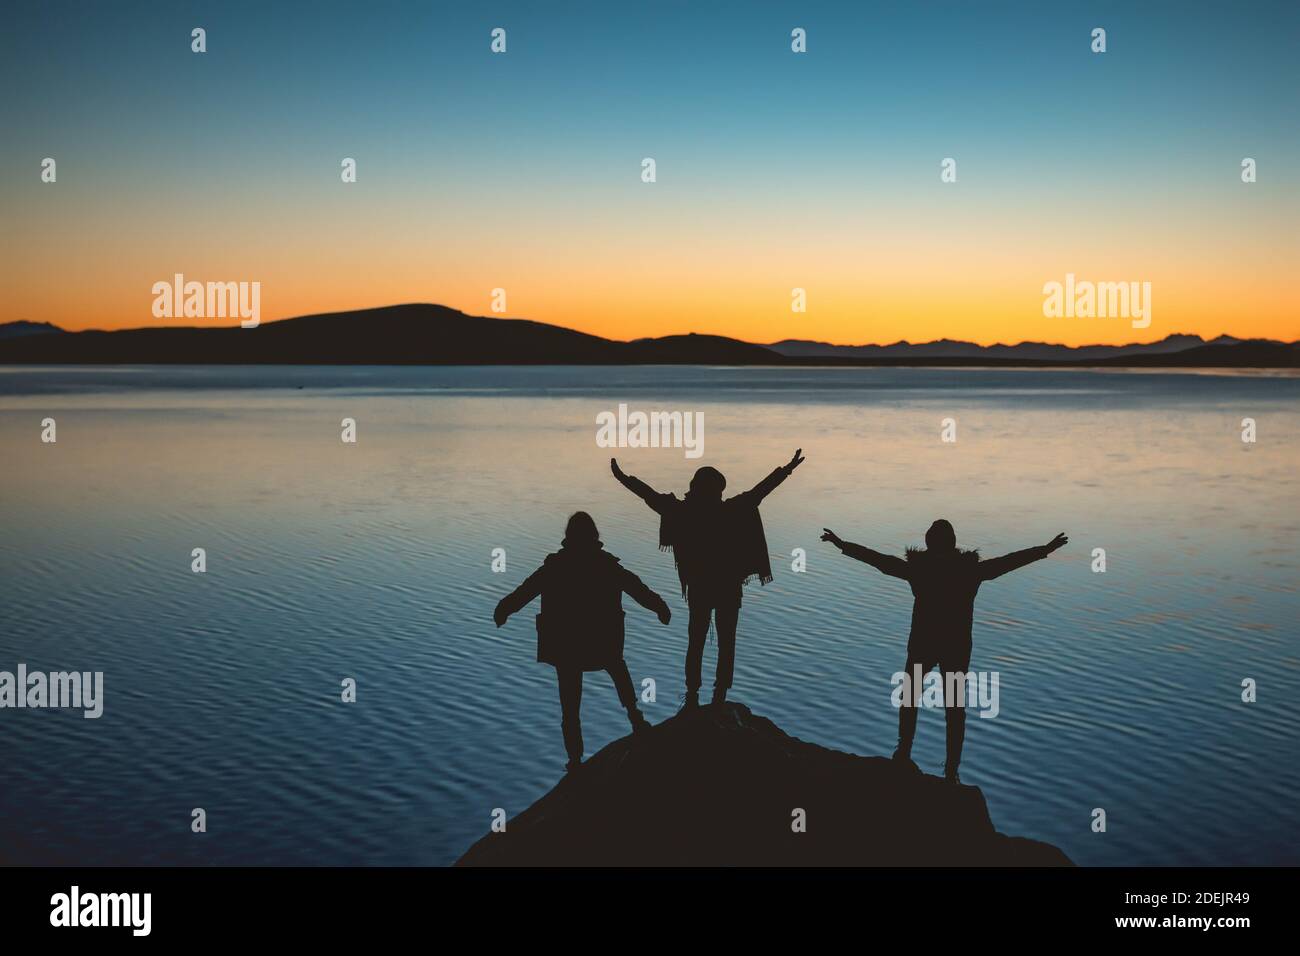 Silhouettes of three happy girls with raised arms stands against sunset lake and mountains Stock Photo